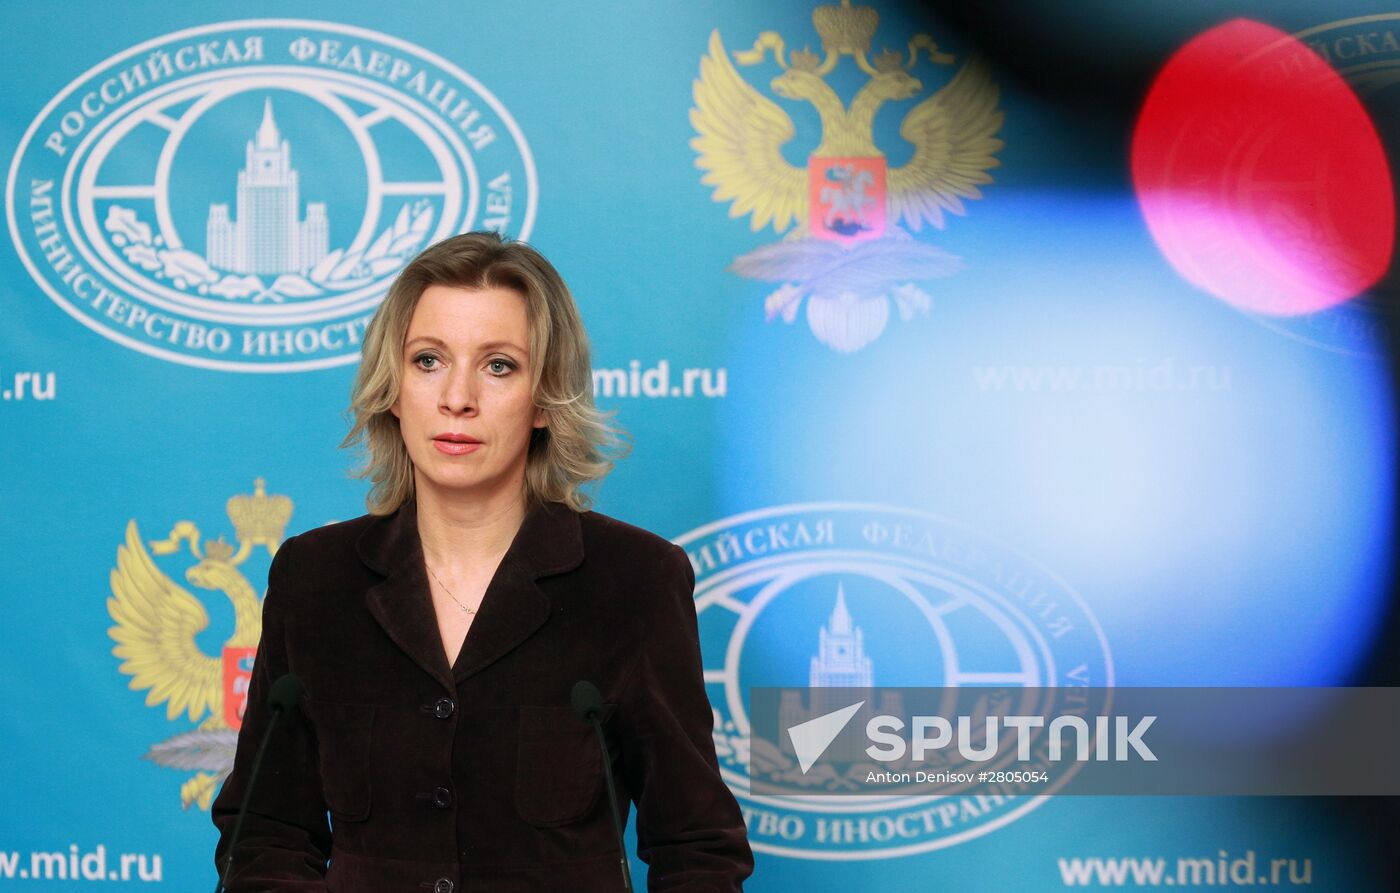 Briefing by Russian Foreign Ministry Spokesperson Zakharova